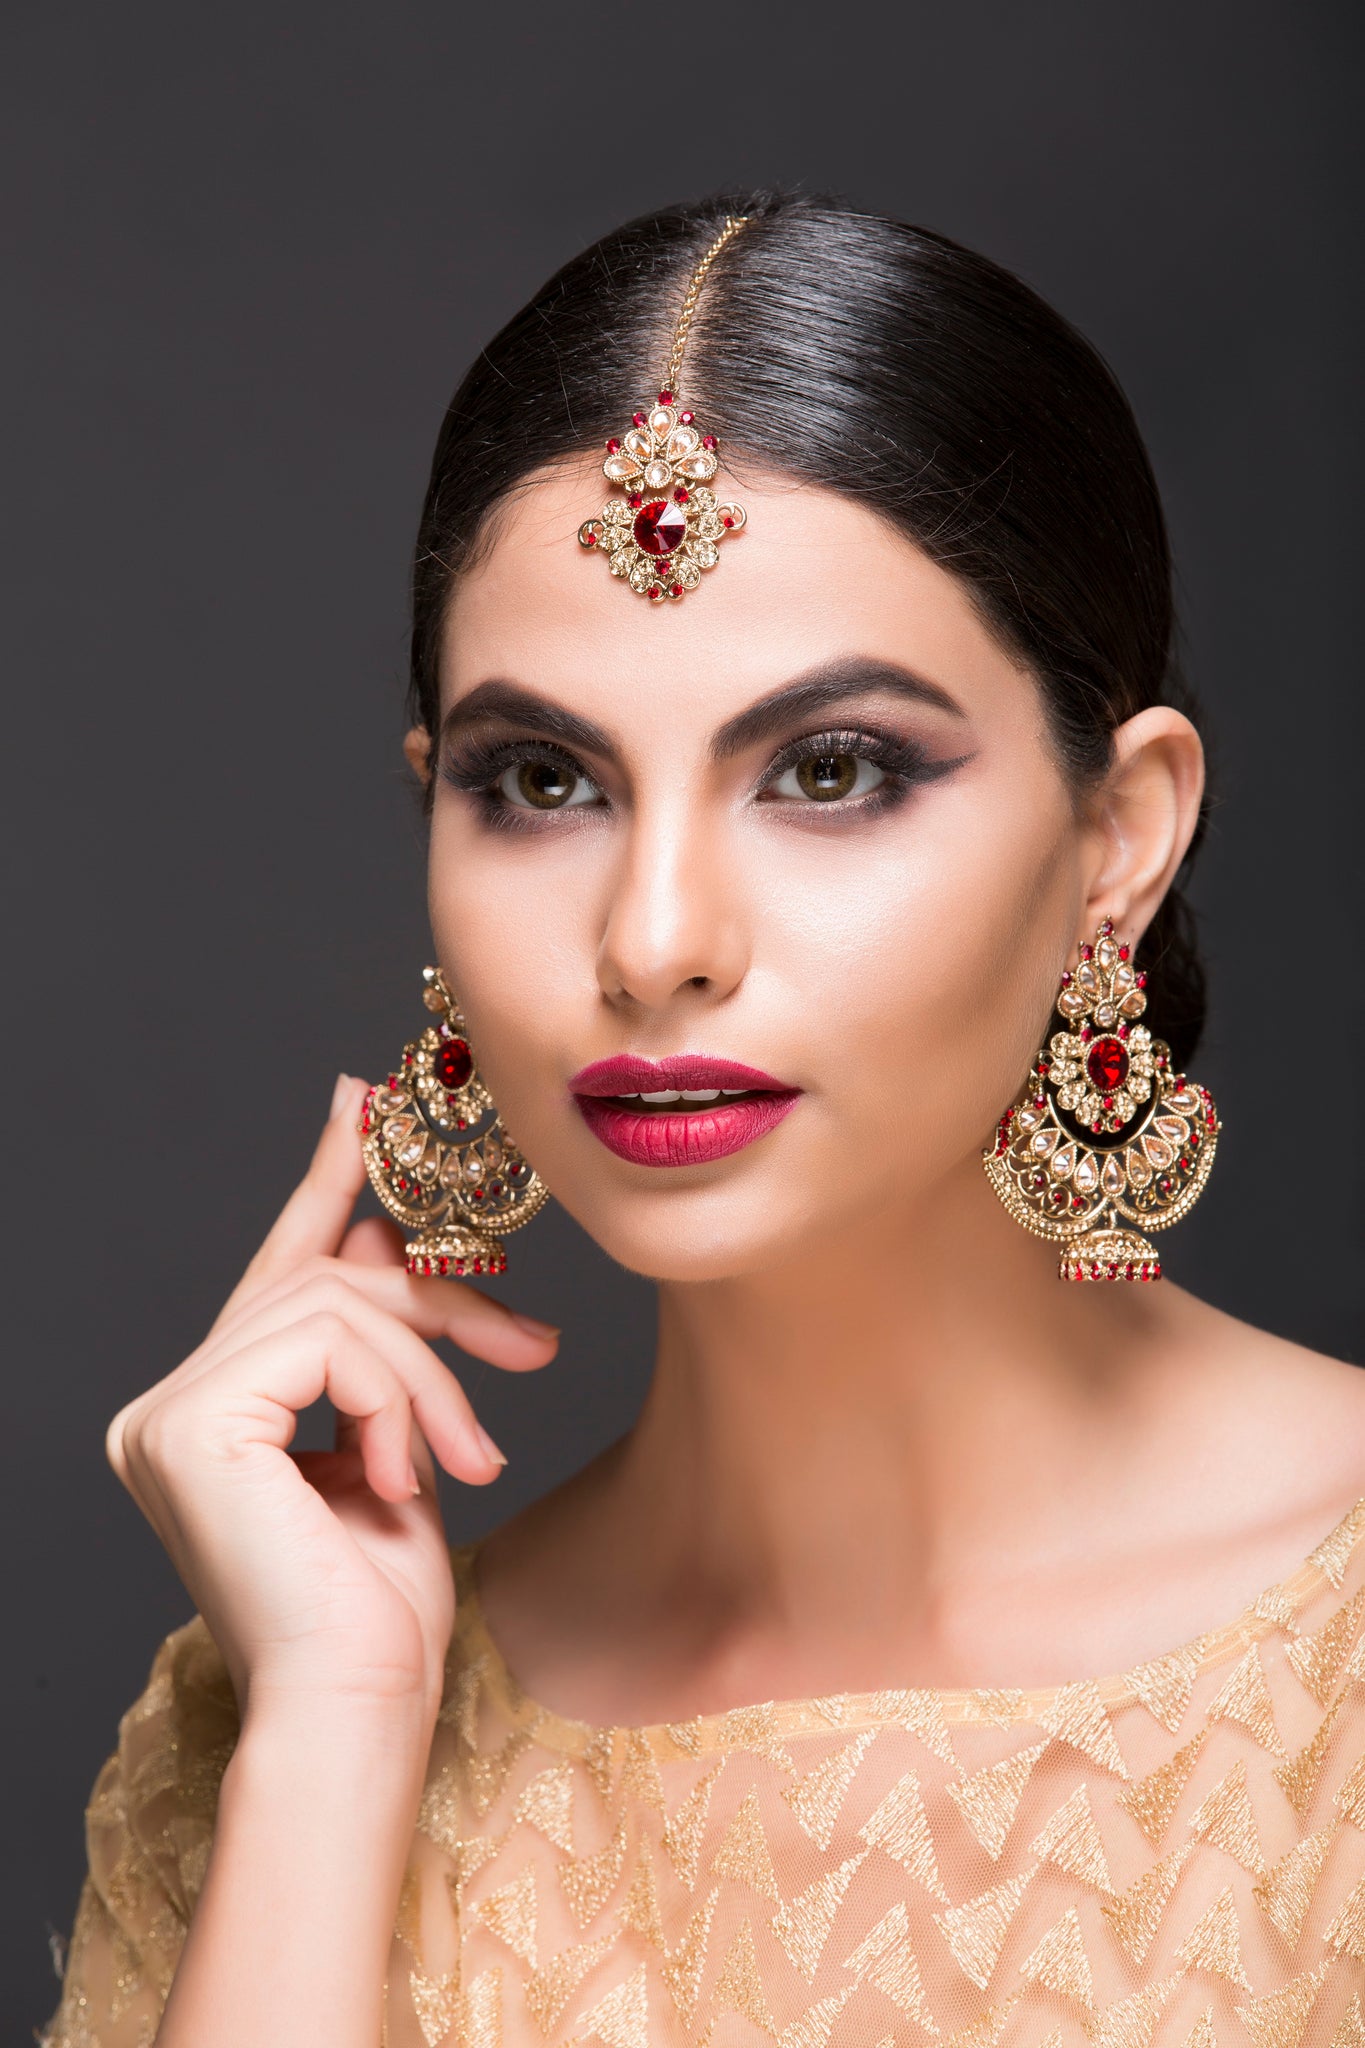 ELEGANT EARRINGS WITH MAANG TIKKA (HEAD PIECE) IN GOLD/NAVY BLUE AND P